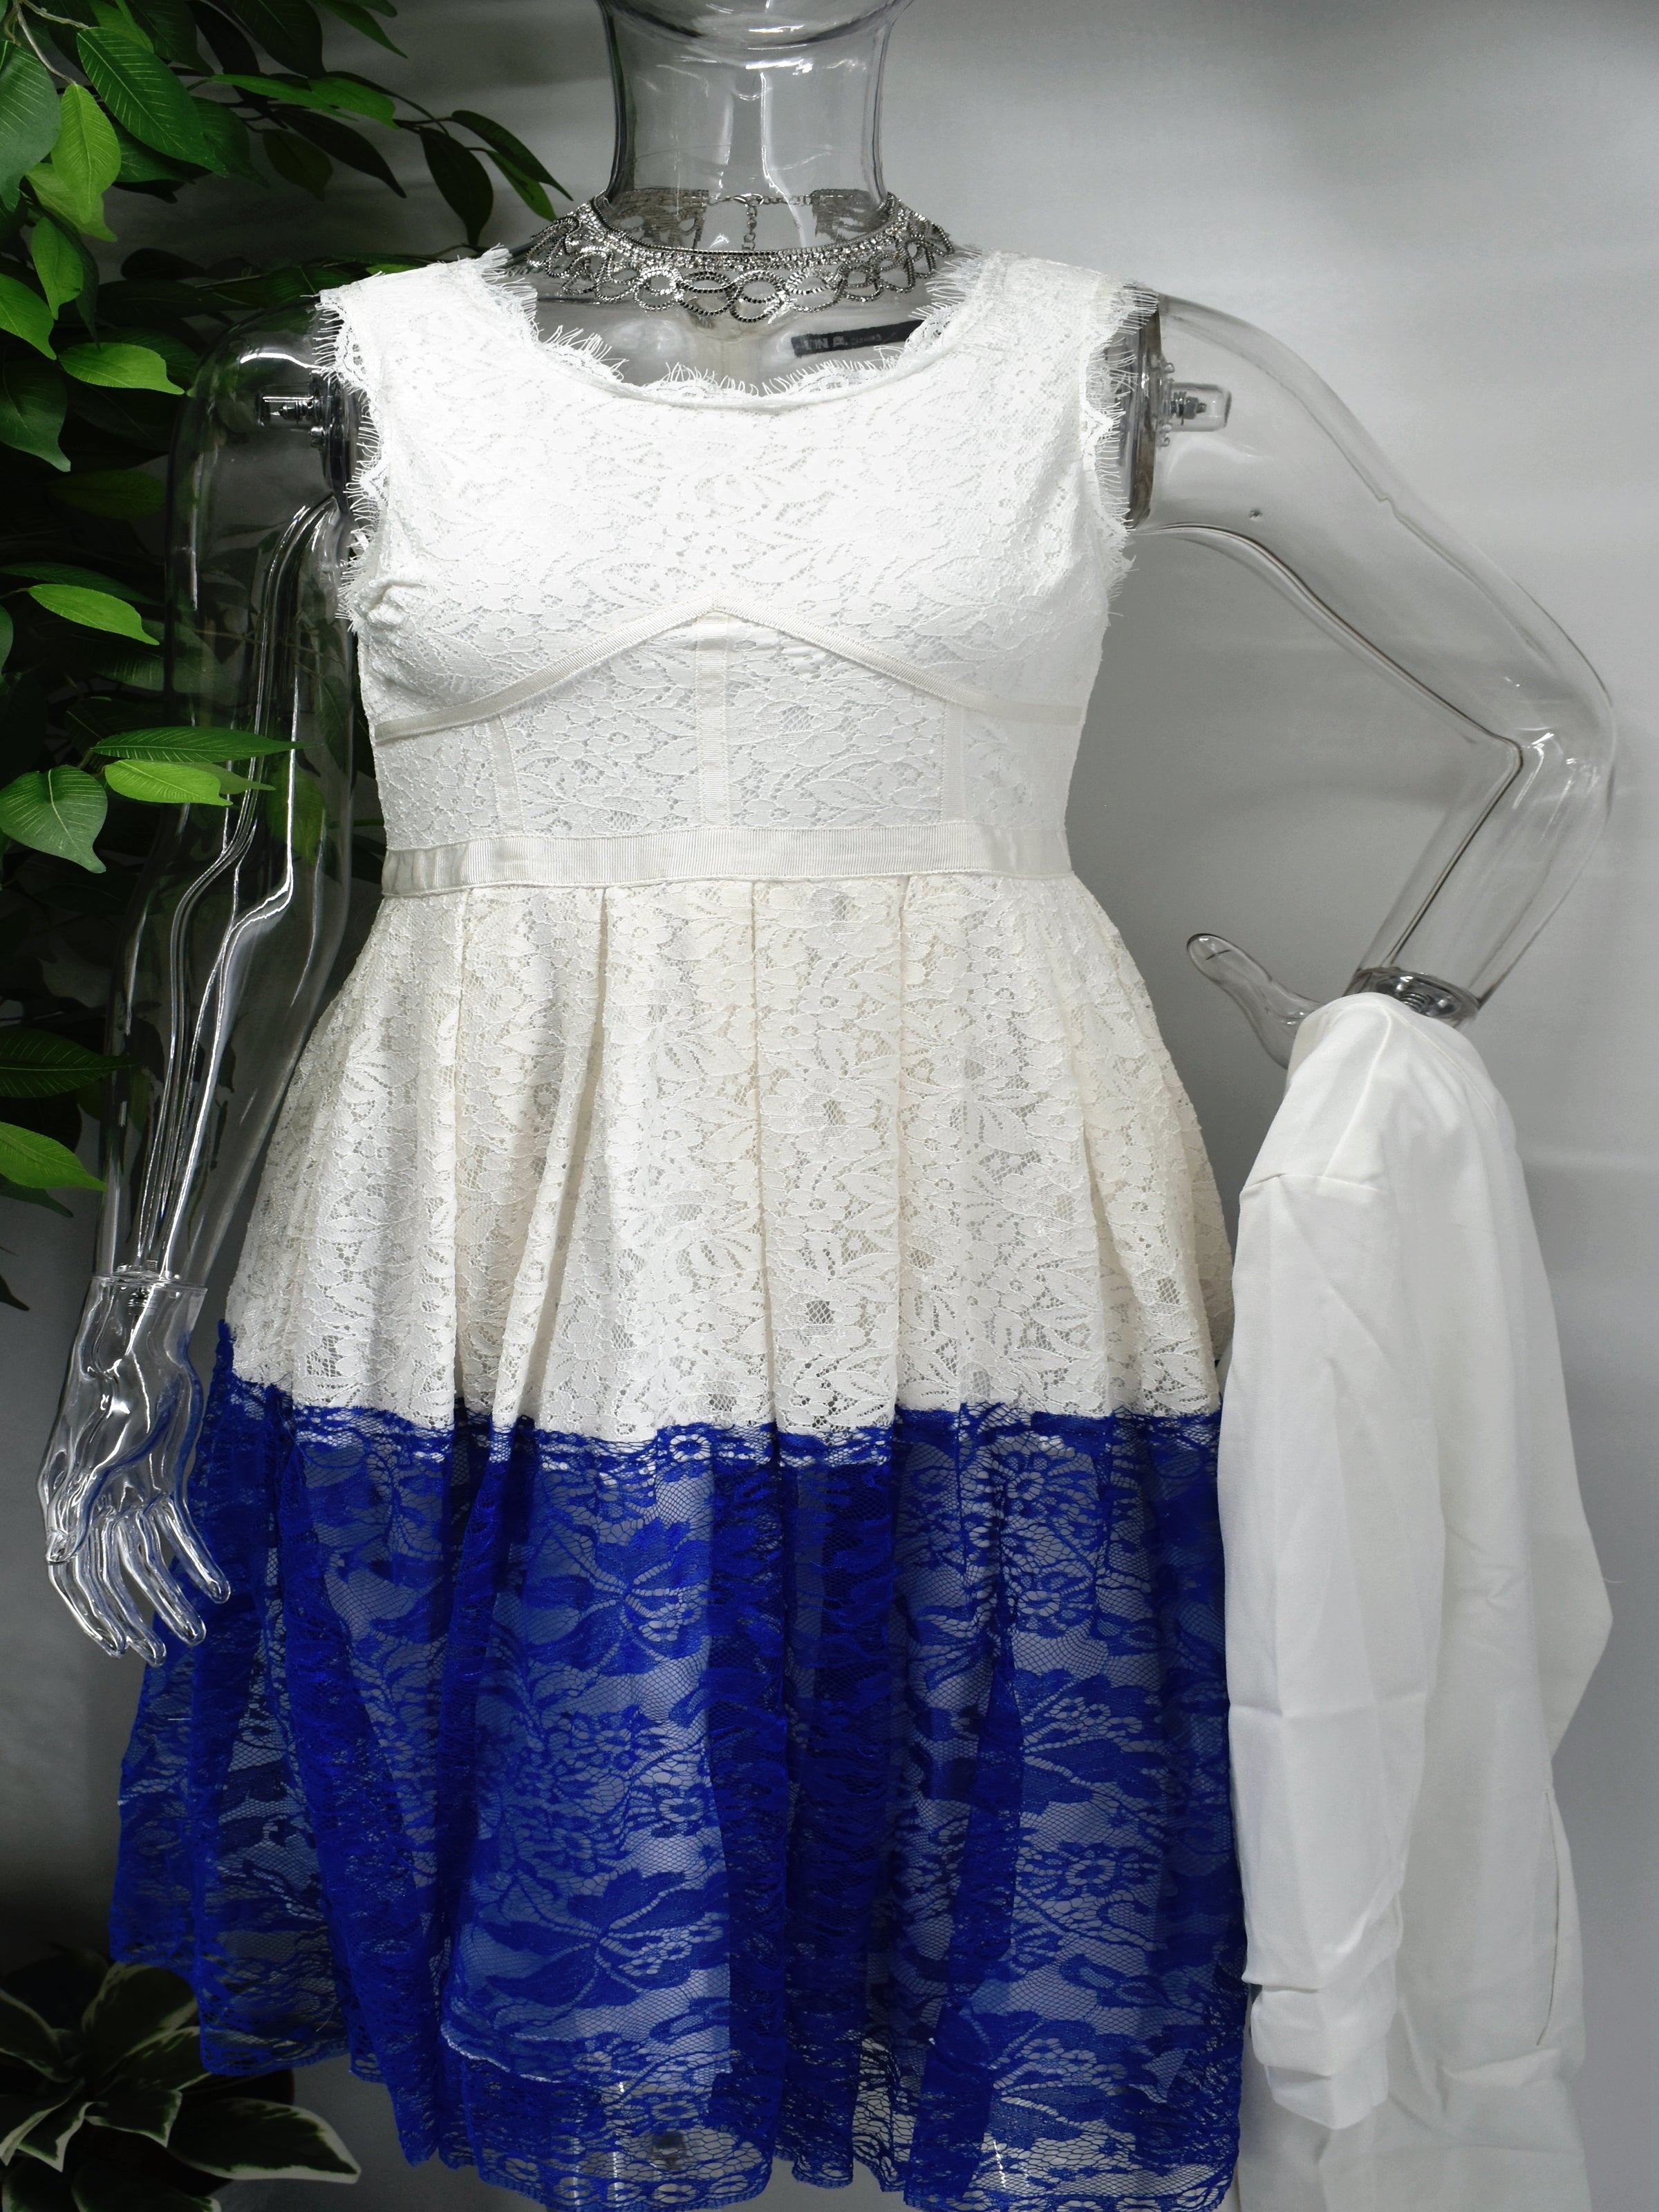 Enjoy how easy it is to wear our Bethea dress from sunrise to sunset. Bethea is a midi length white and blue lace dress. It is sleeveless with a scoop neckline, fitted bodice and a flared skirt. 